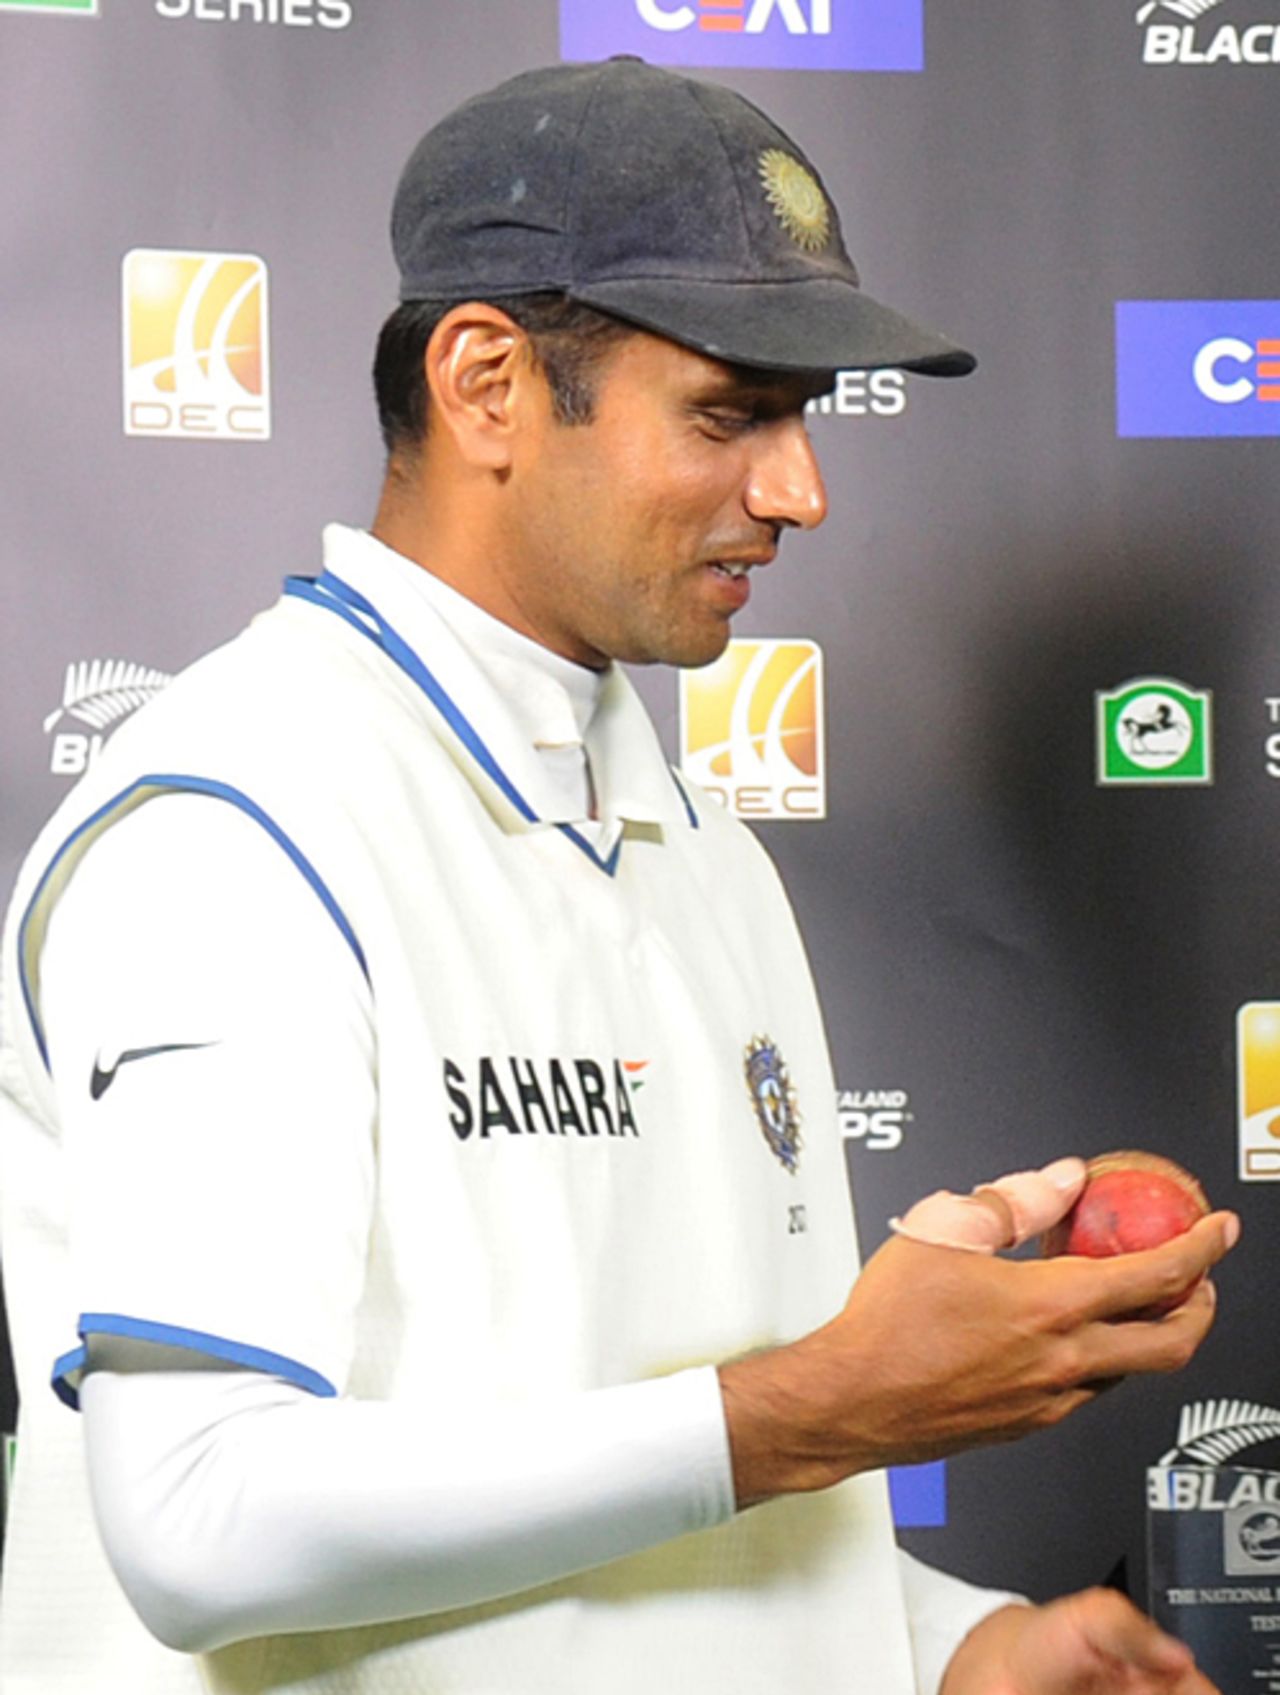 Rahul Dravid is presented with the match ball, New Zealand v India, 3rd Test, Wellington, 5th day, April 7, 2009